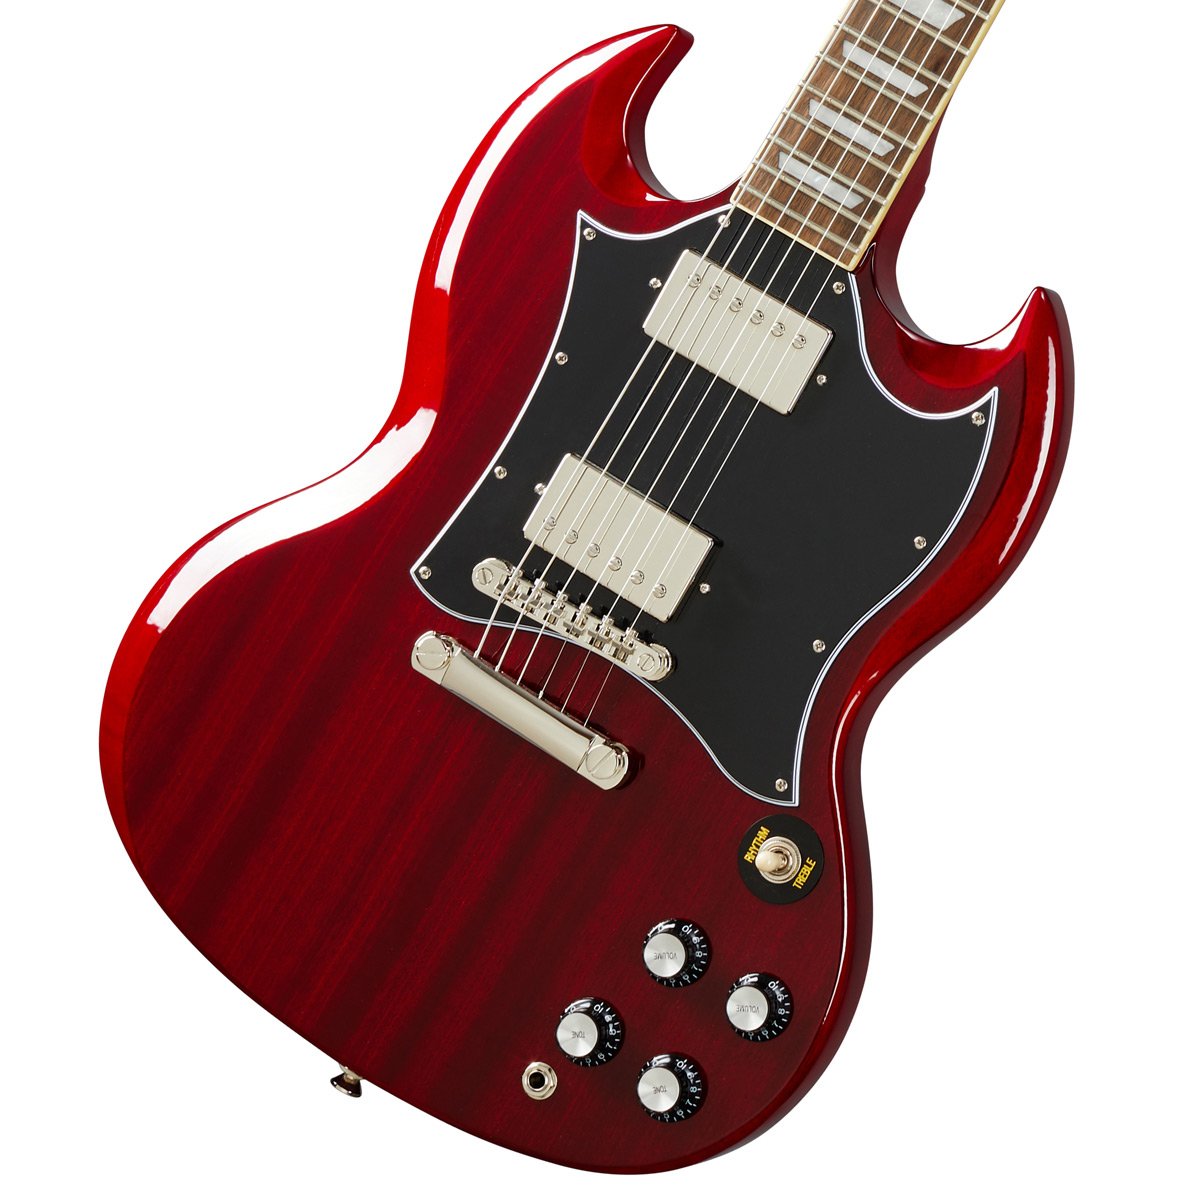 Epiphone / Inspired by Gibson SG Standard Heritage Cherry エピフォン エレキギター